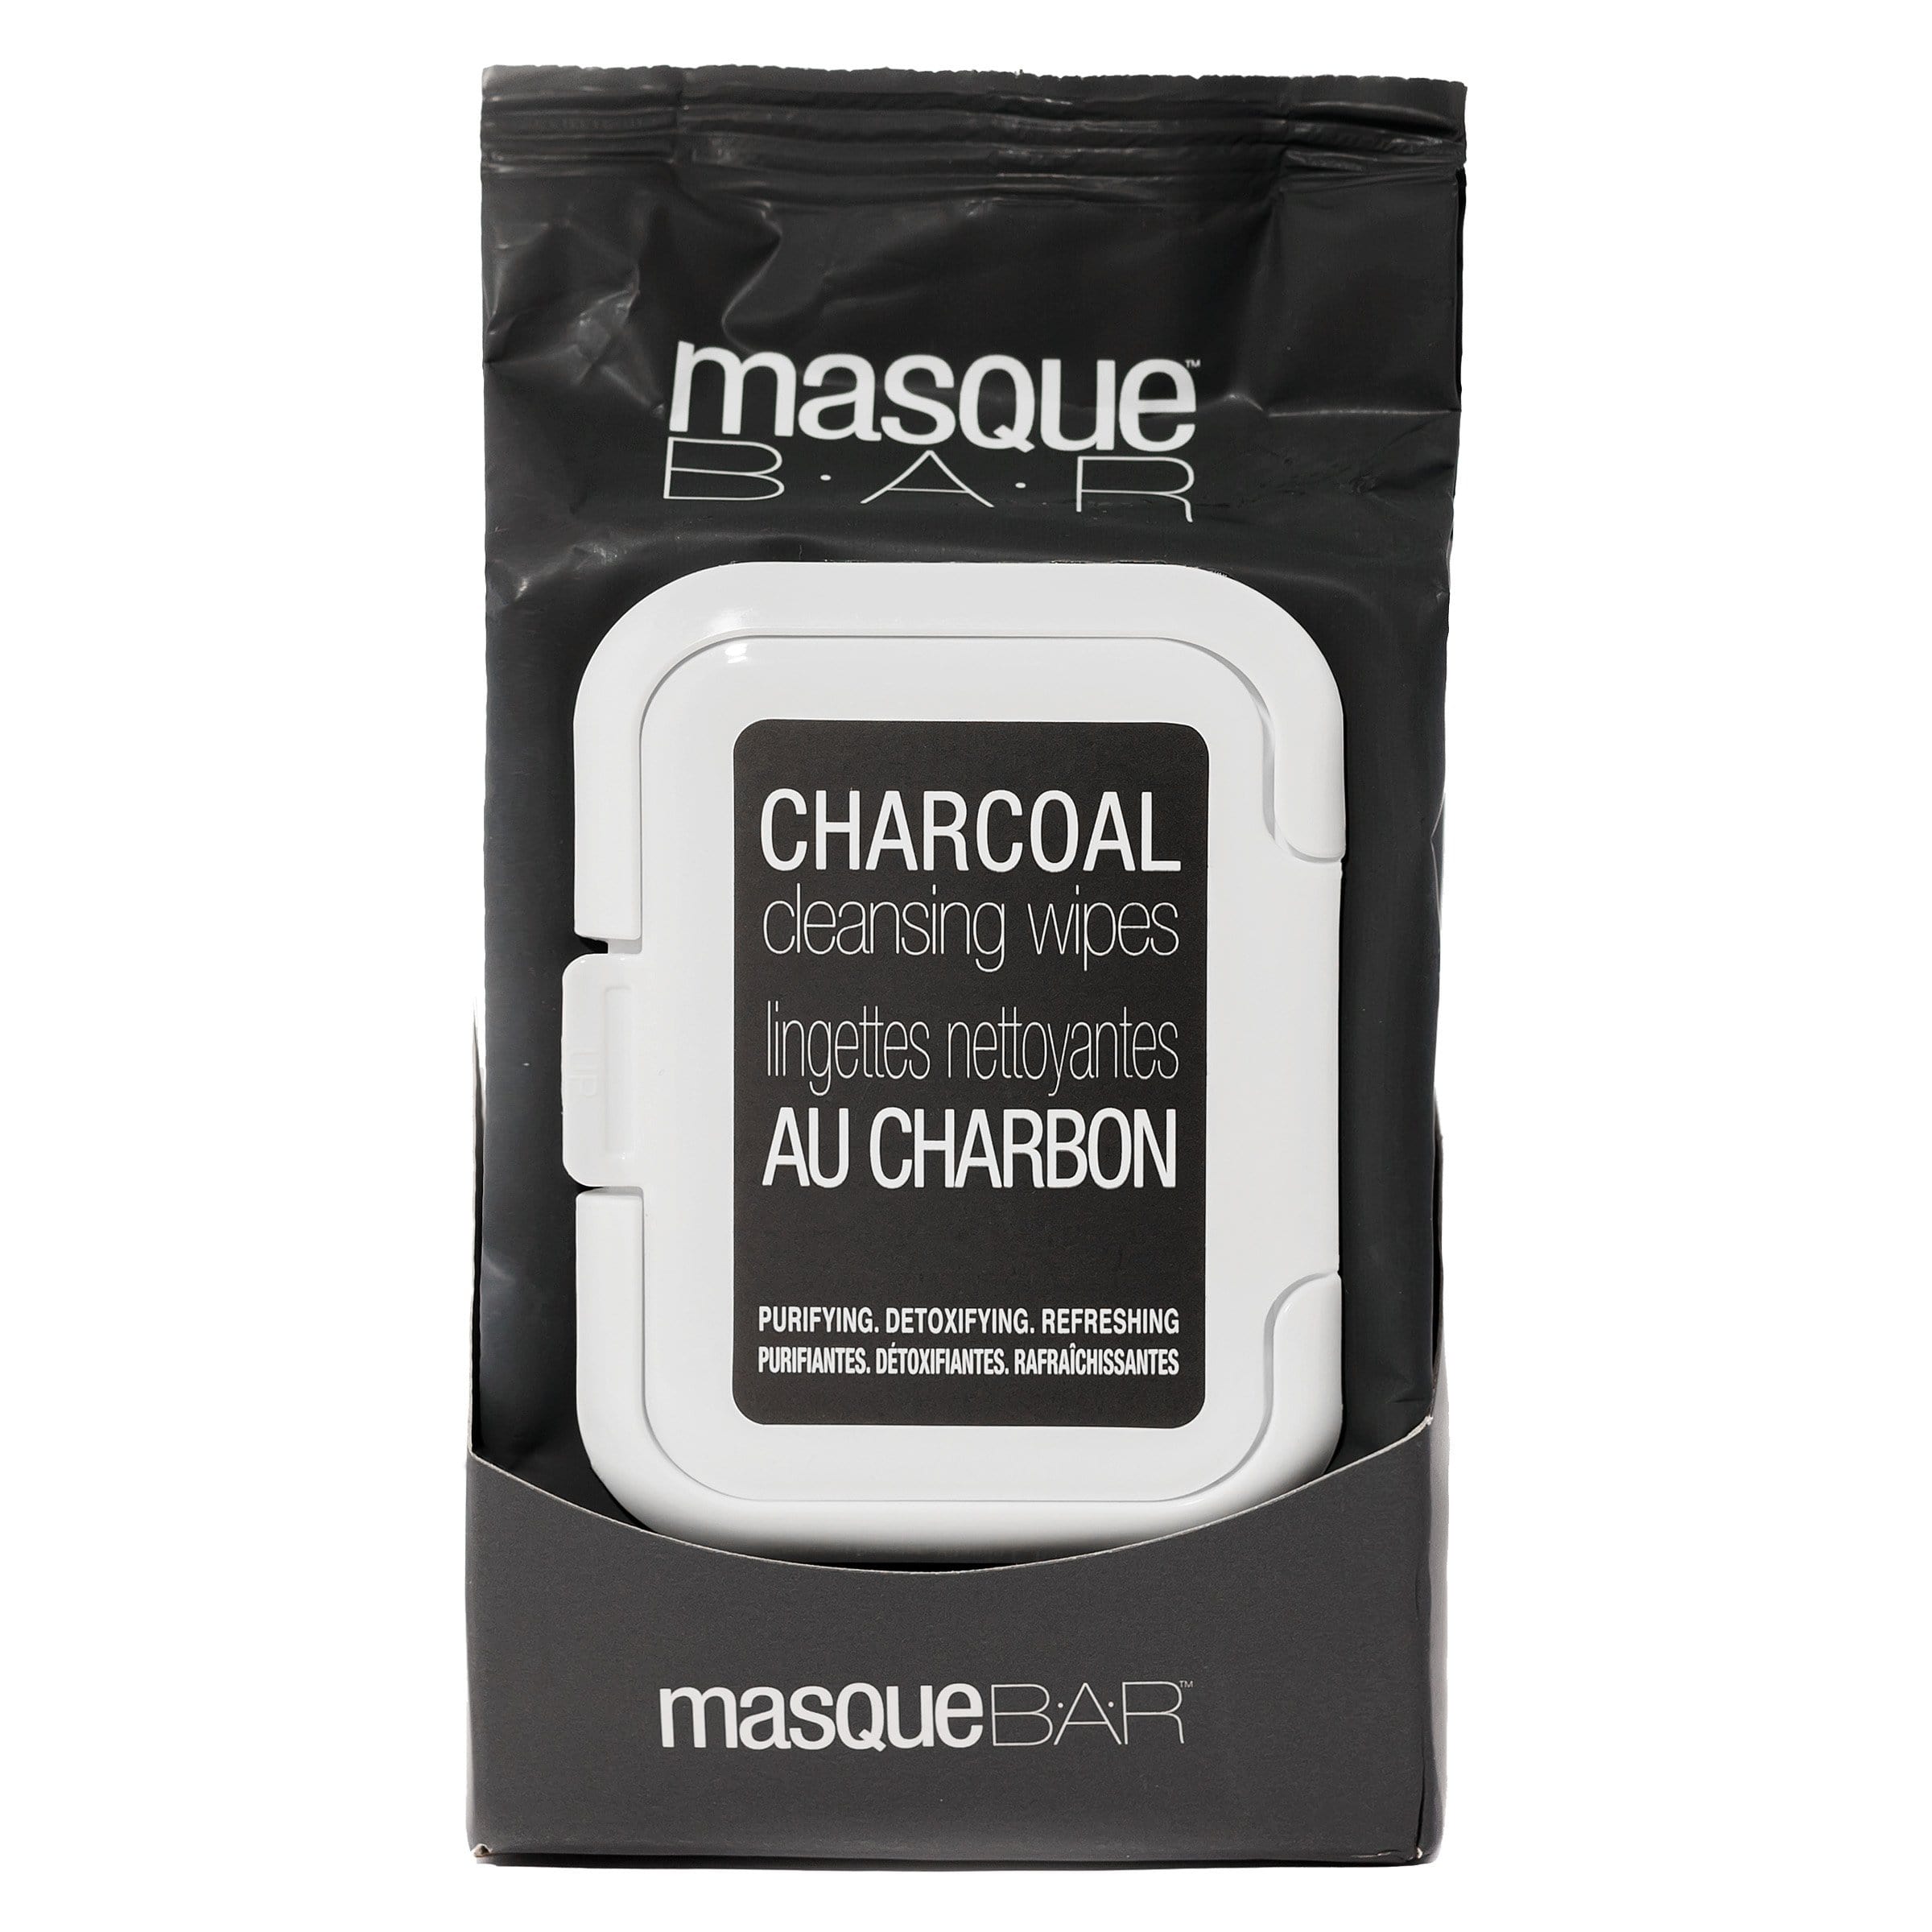 Cleansing Charcoal Face Wipes | masque BAR